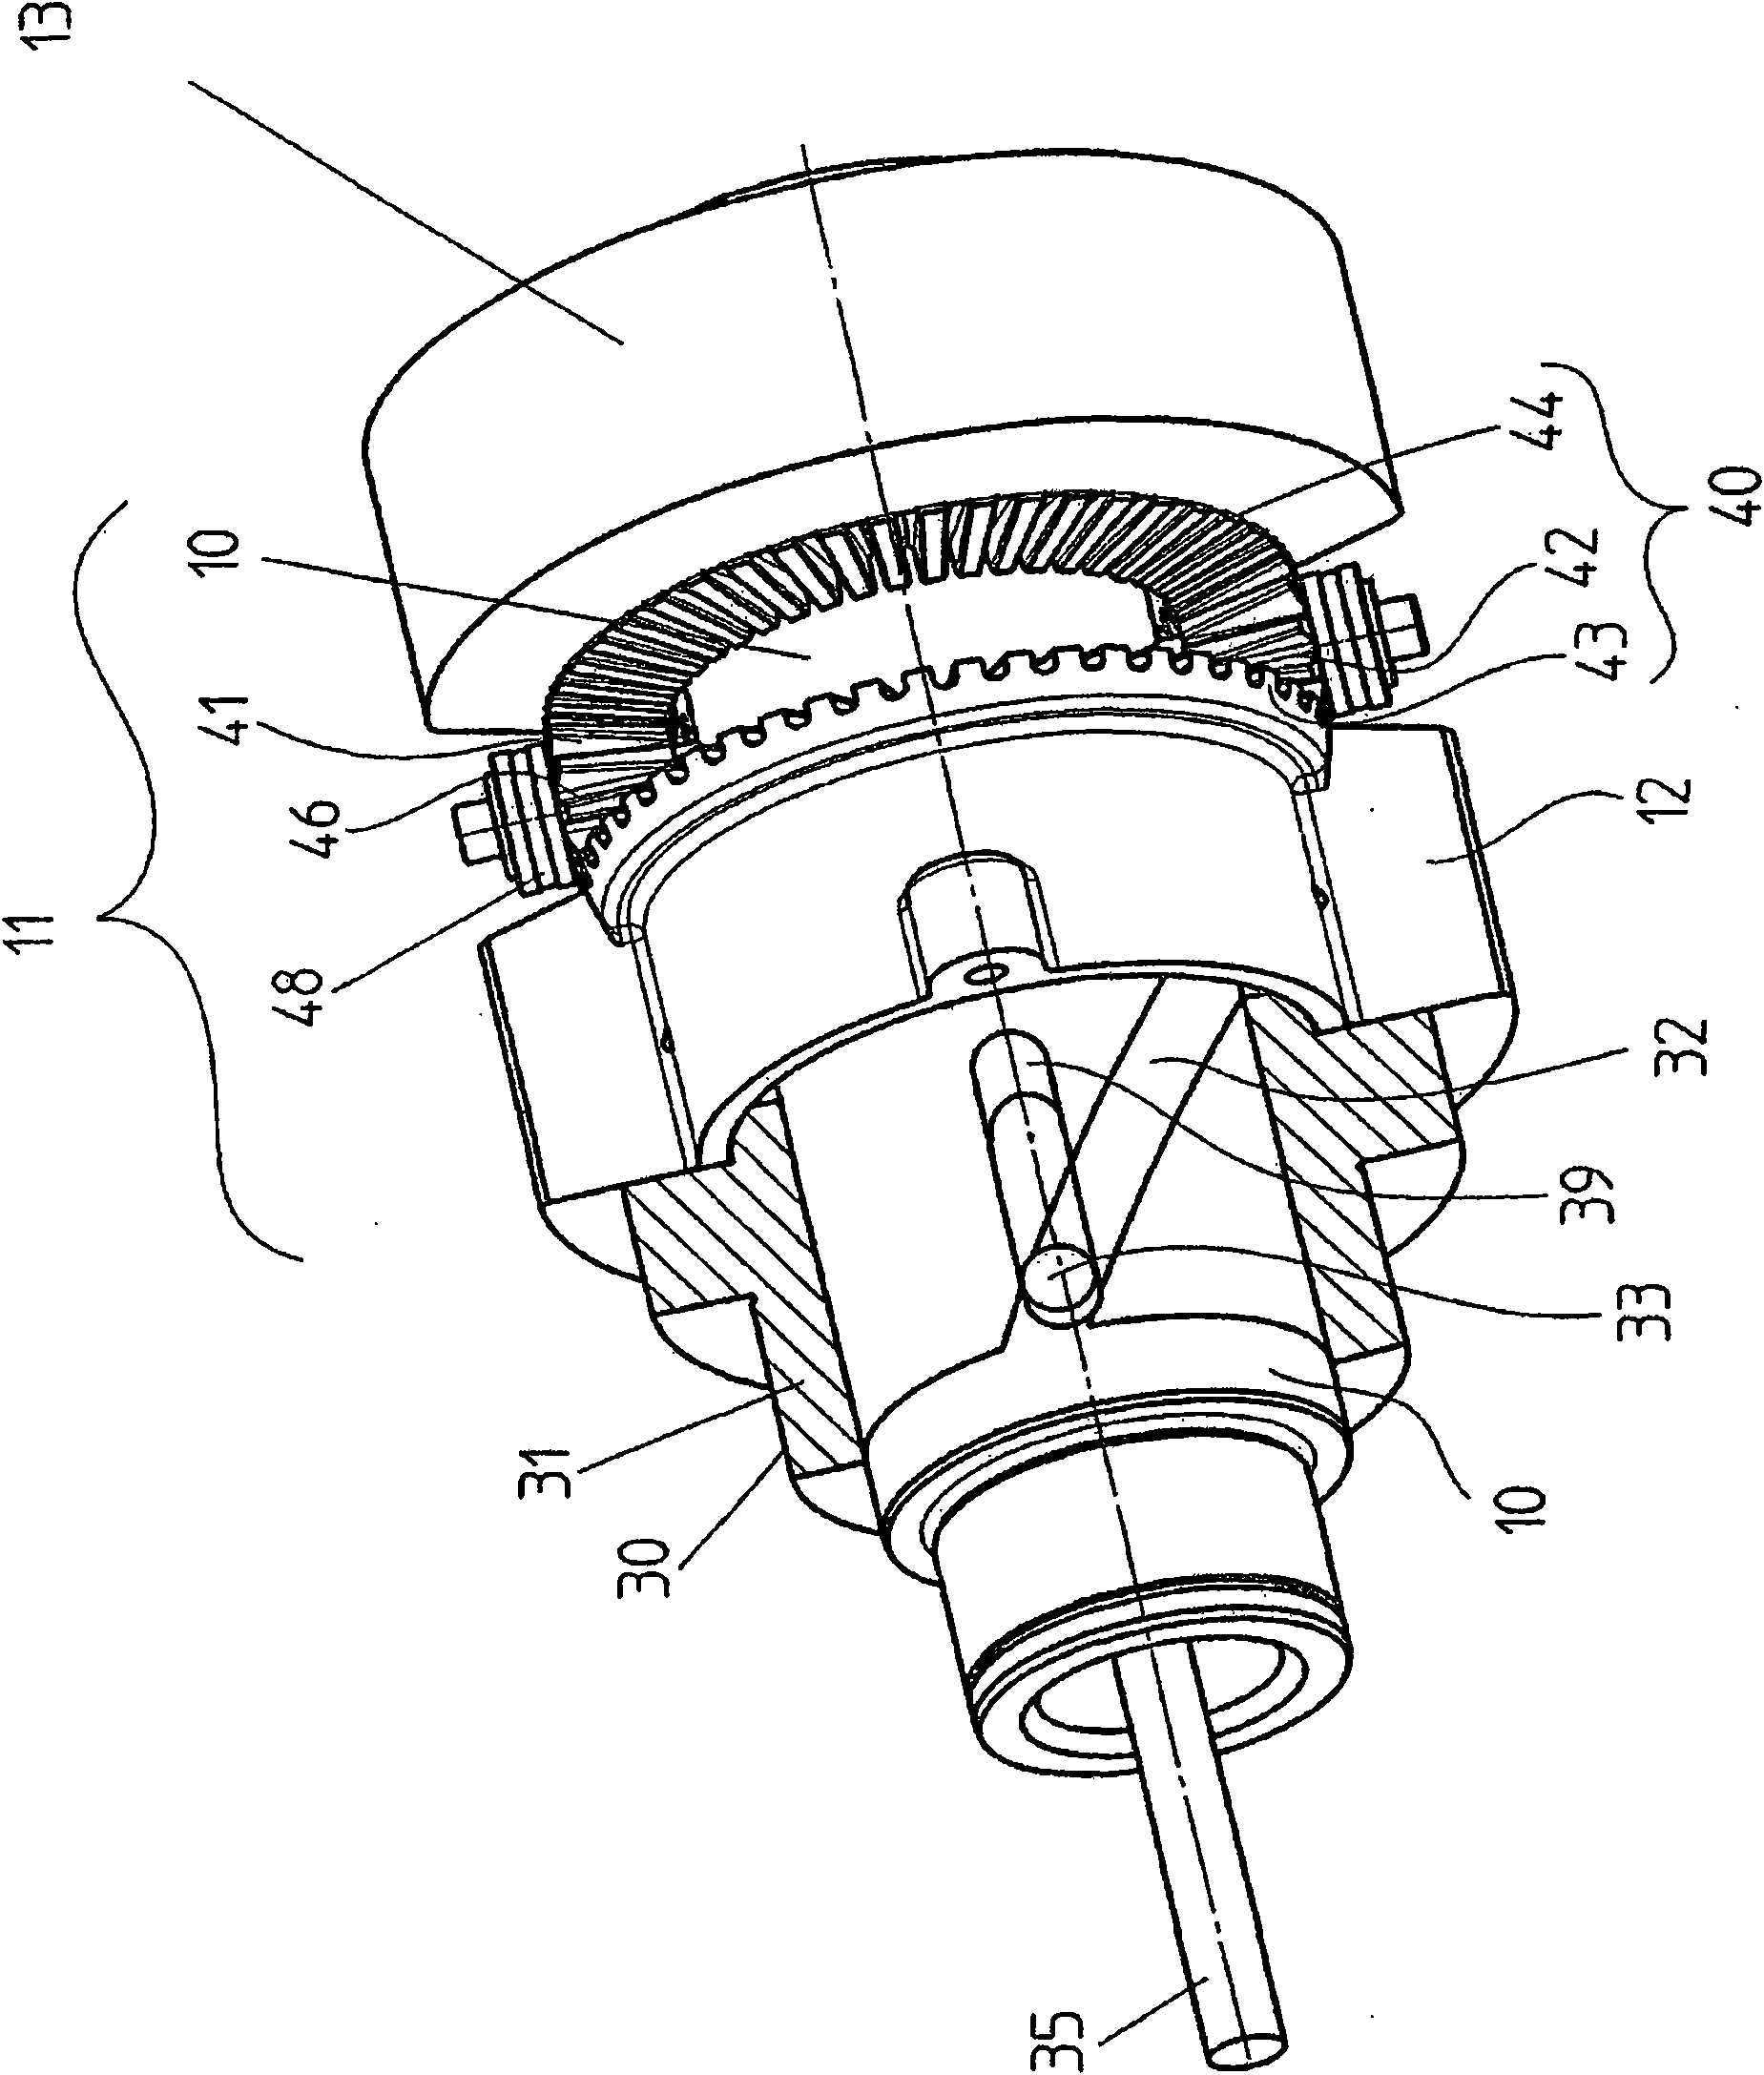 Device for generating circular oscillation or directional oscillation